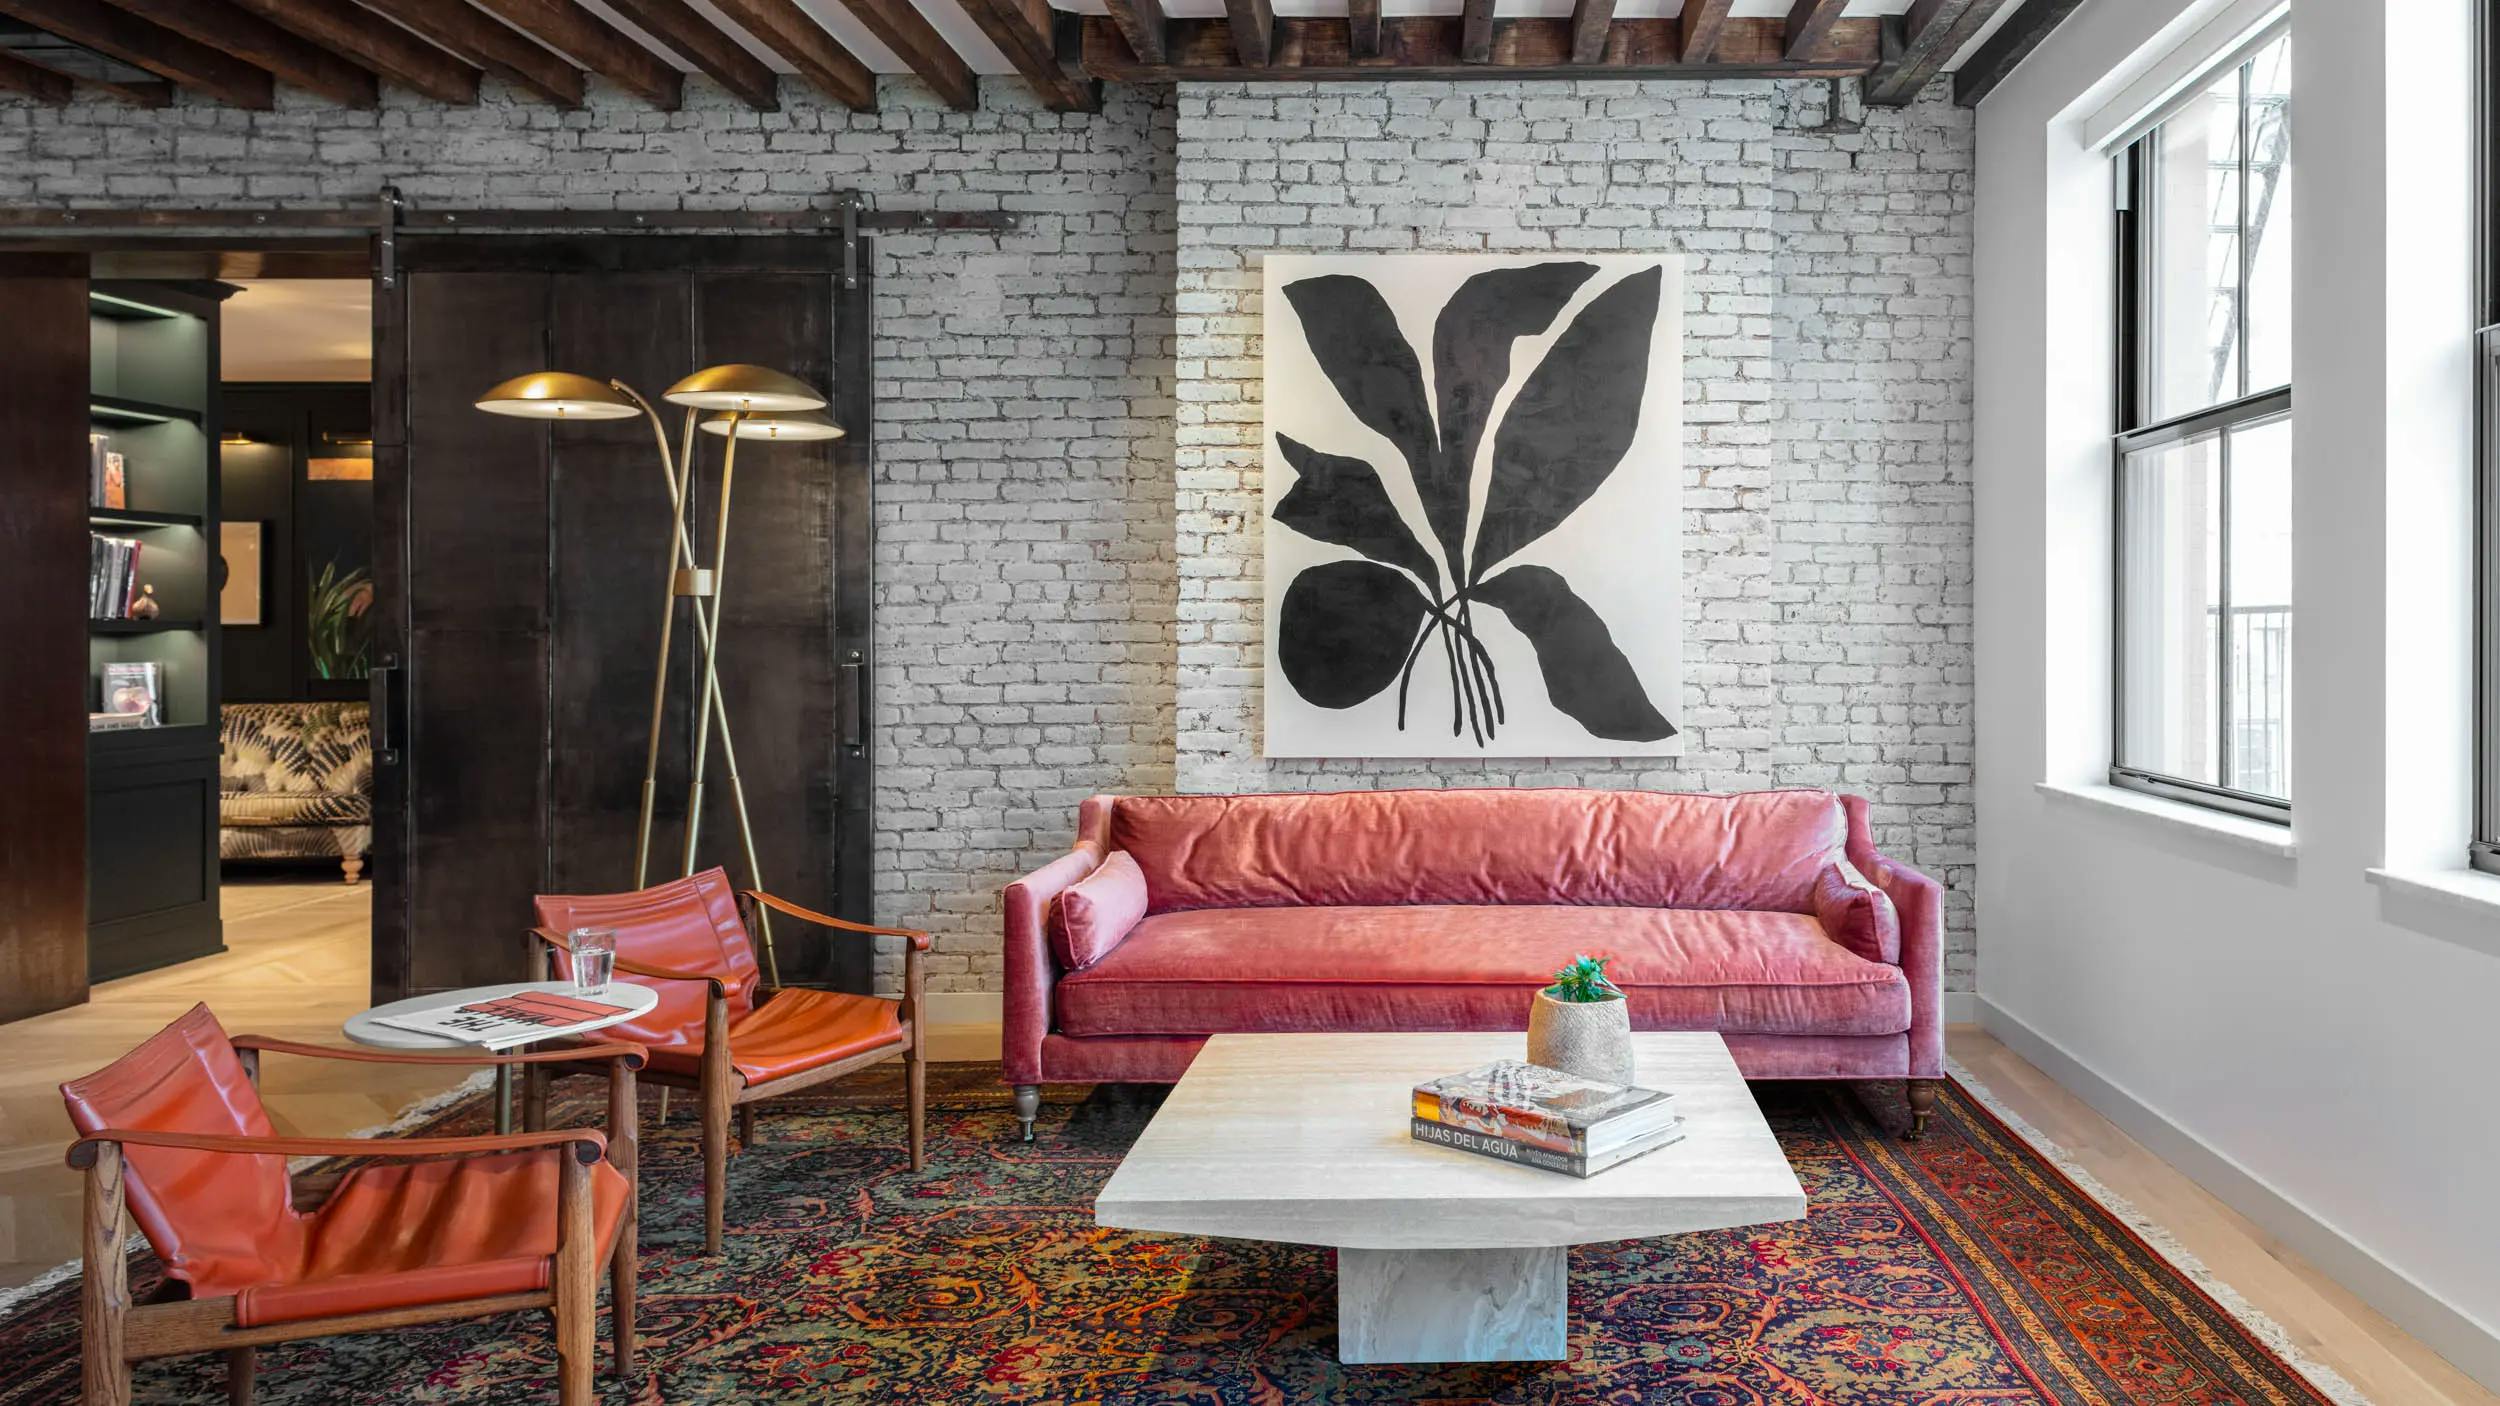 A large, black and white botanical painting by artist Kate Roebuck installed on a white brick wall above a pink sofa at FIG Agency.